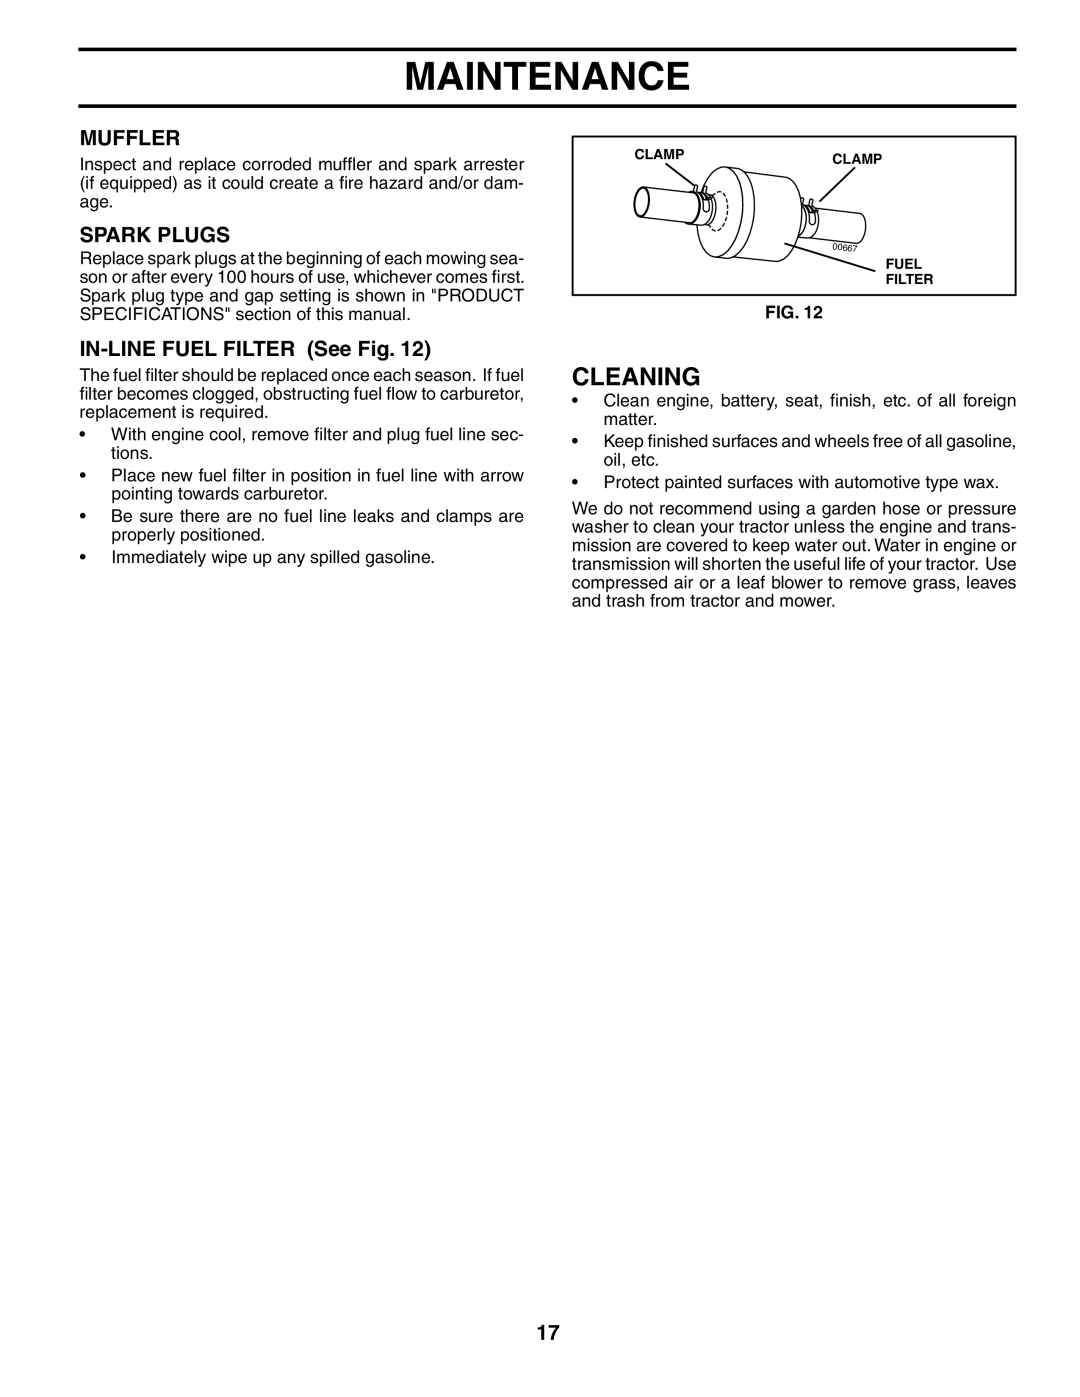 Weed Eater 191064 manual Cleaning, Muffler, Spark Plugs, IN-LINE FUEL FILTER See Fig, Maintenance 